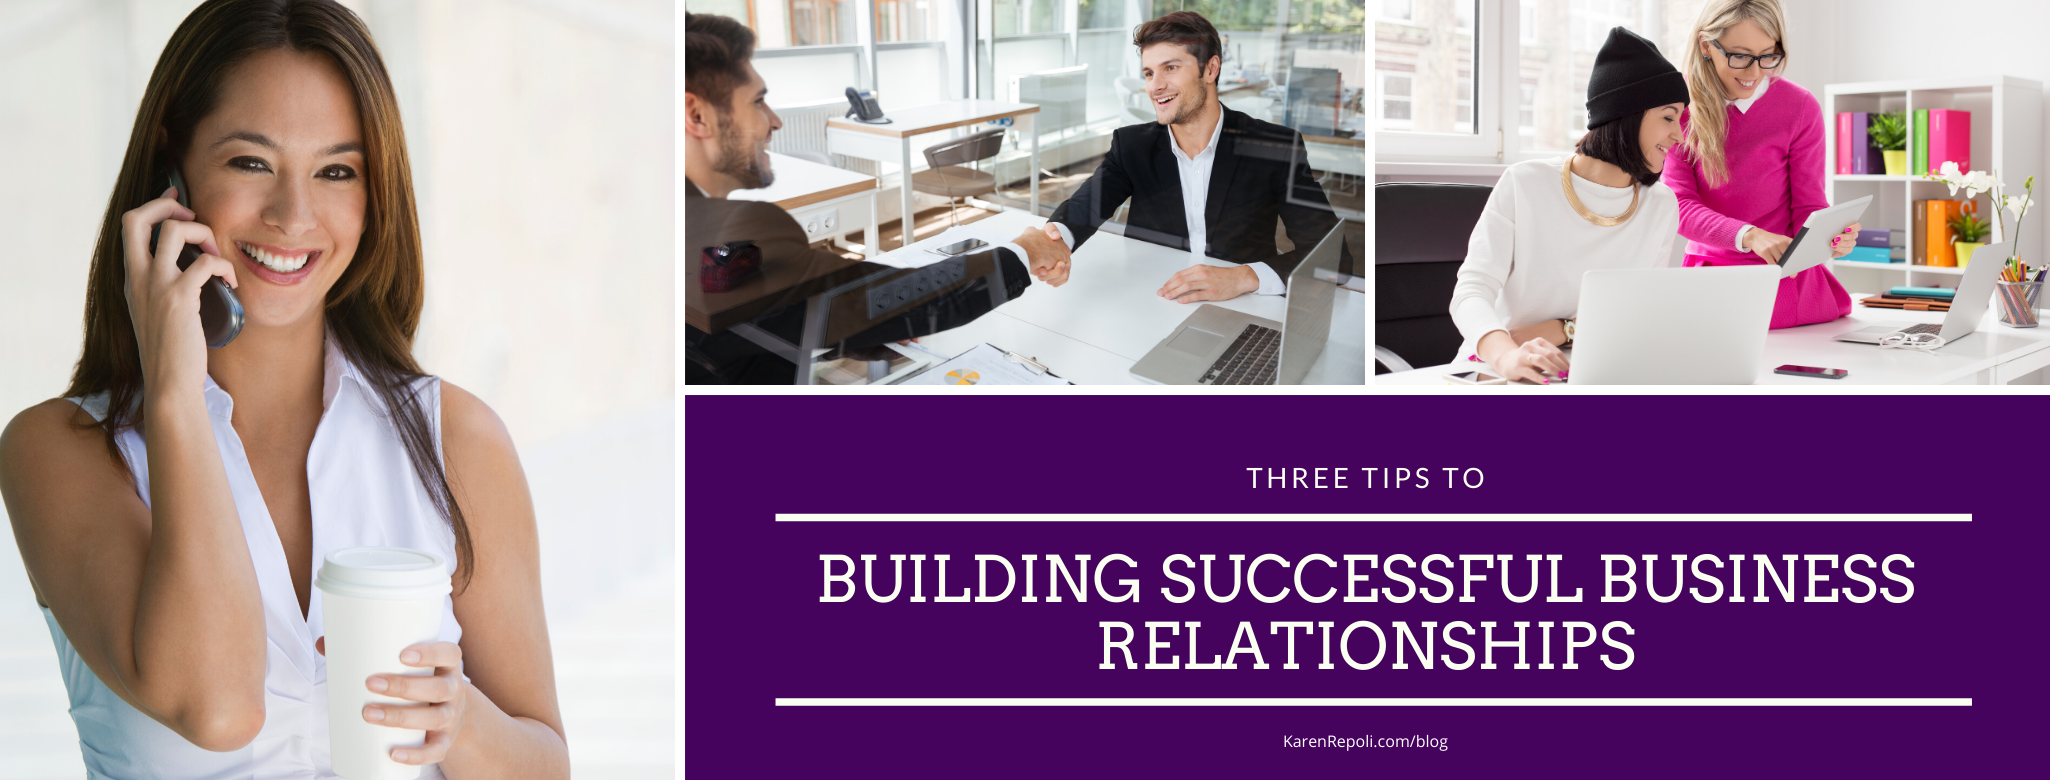 Building Successful Business Relationships